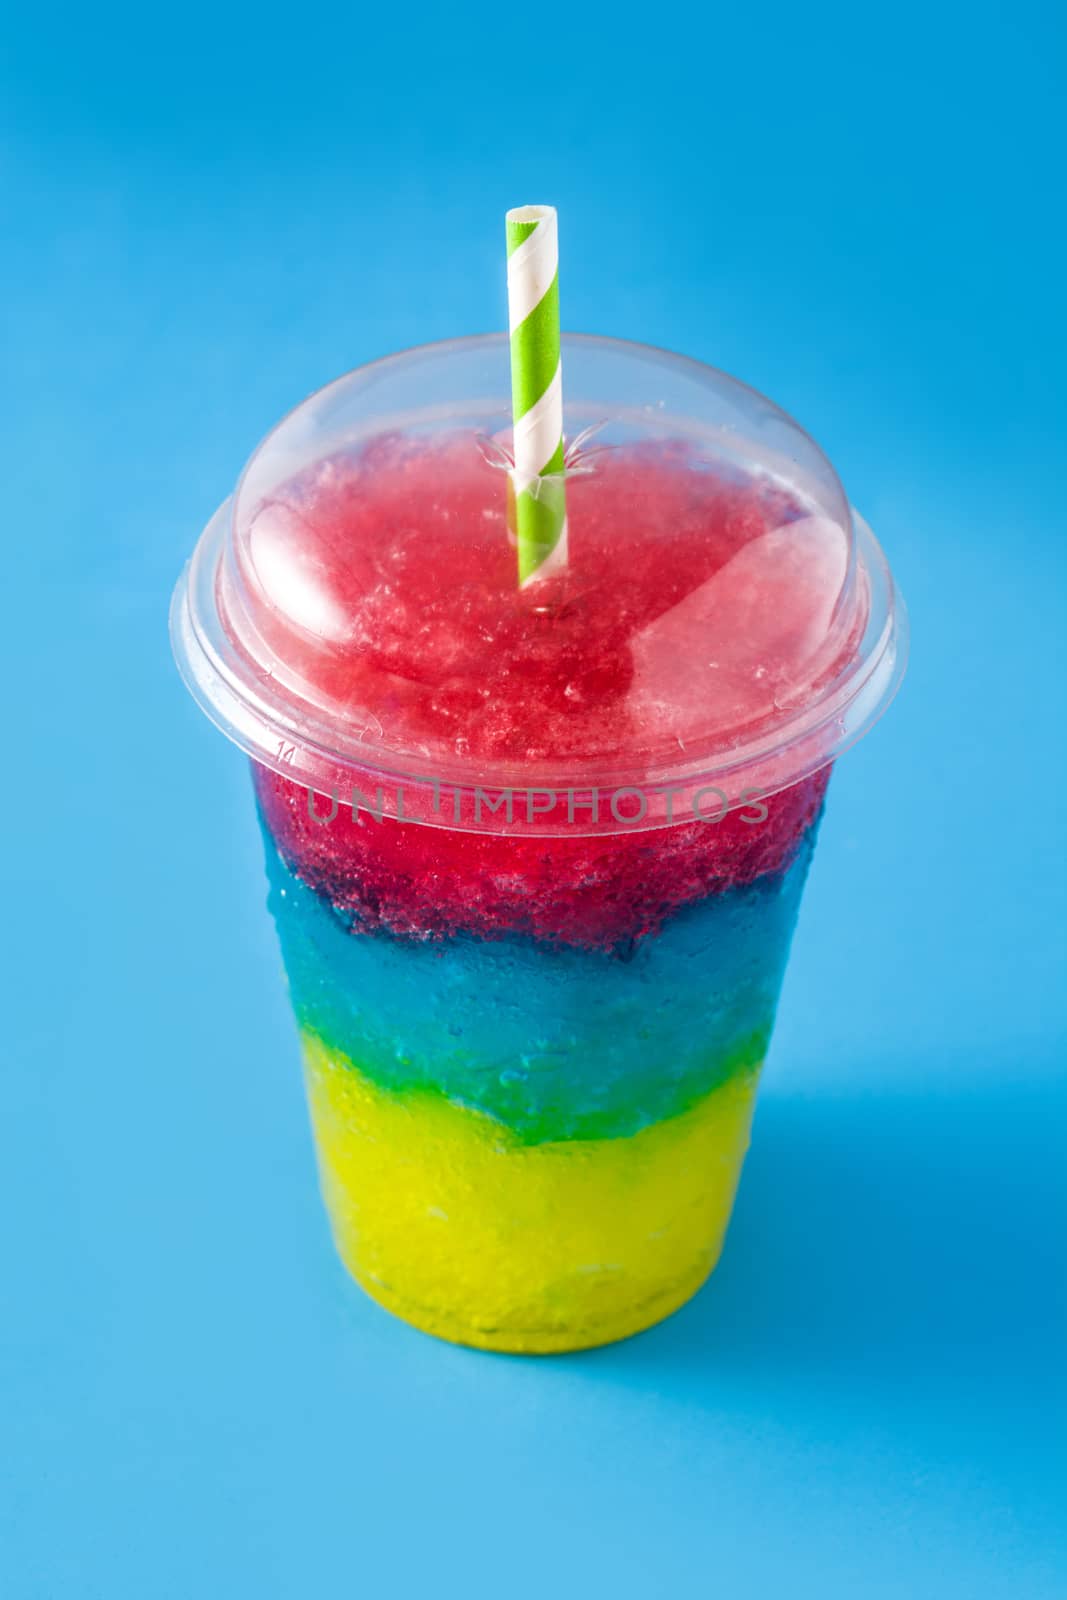 Colorful slushie of differents flavors  by chandlervid85